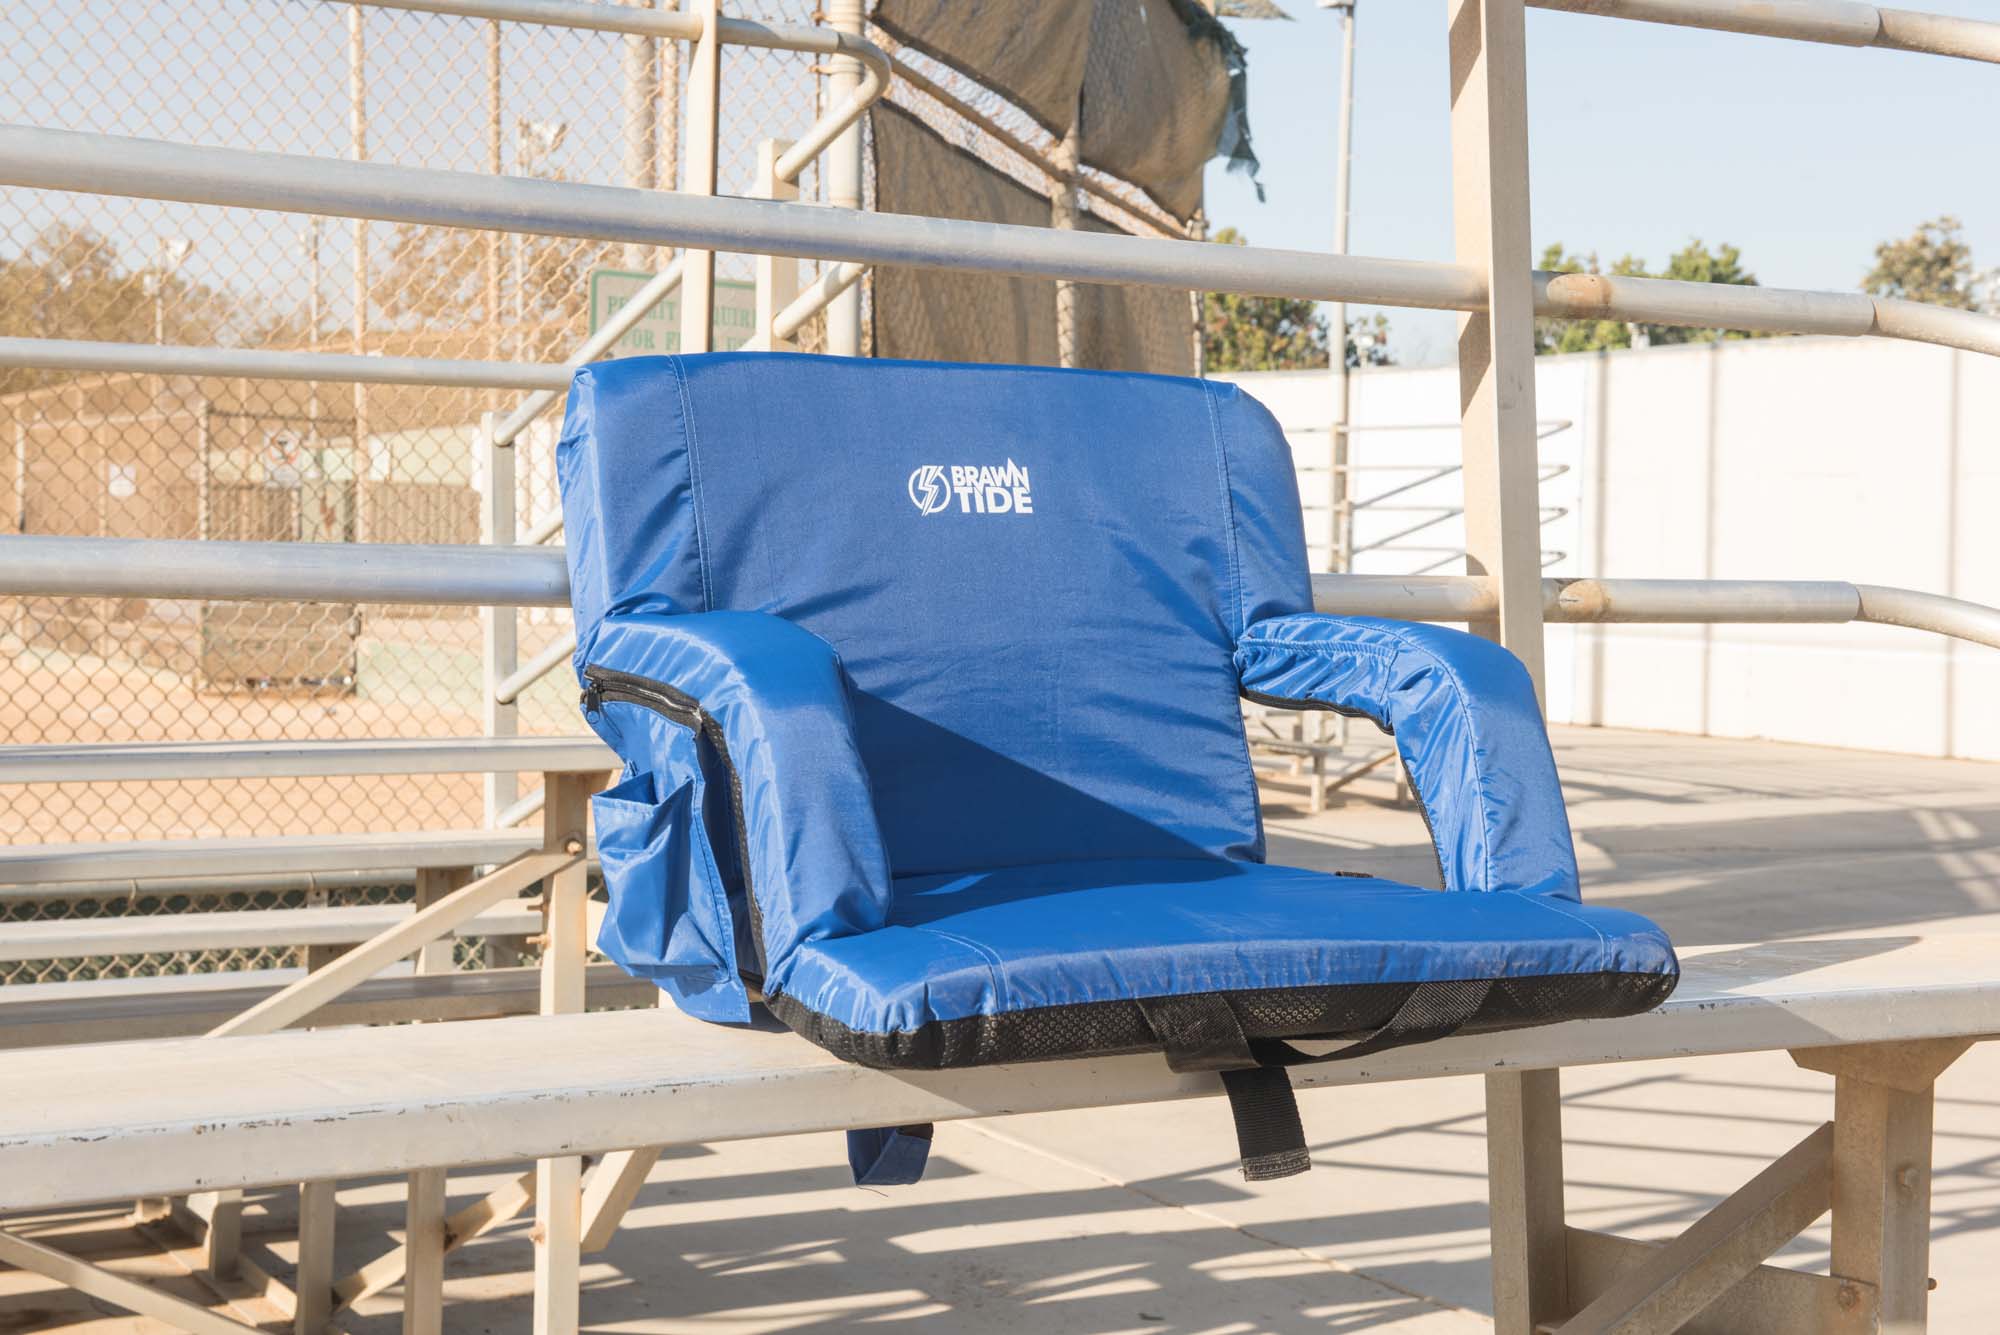 Stadium Seat For Bleachers With Padded Cushion (1 or 2 Pack